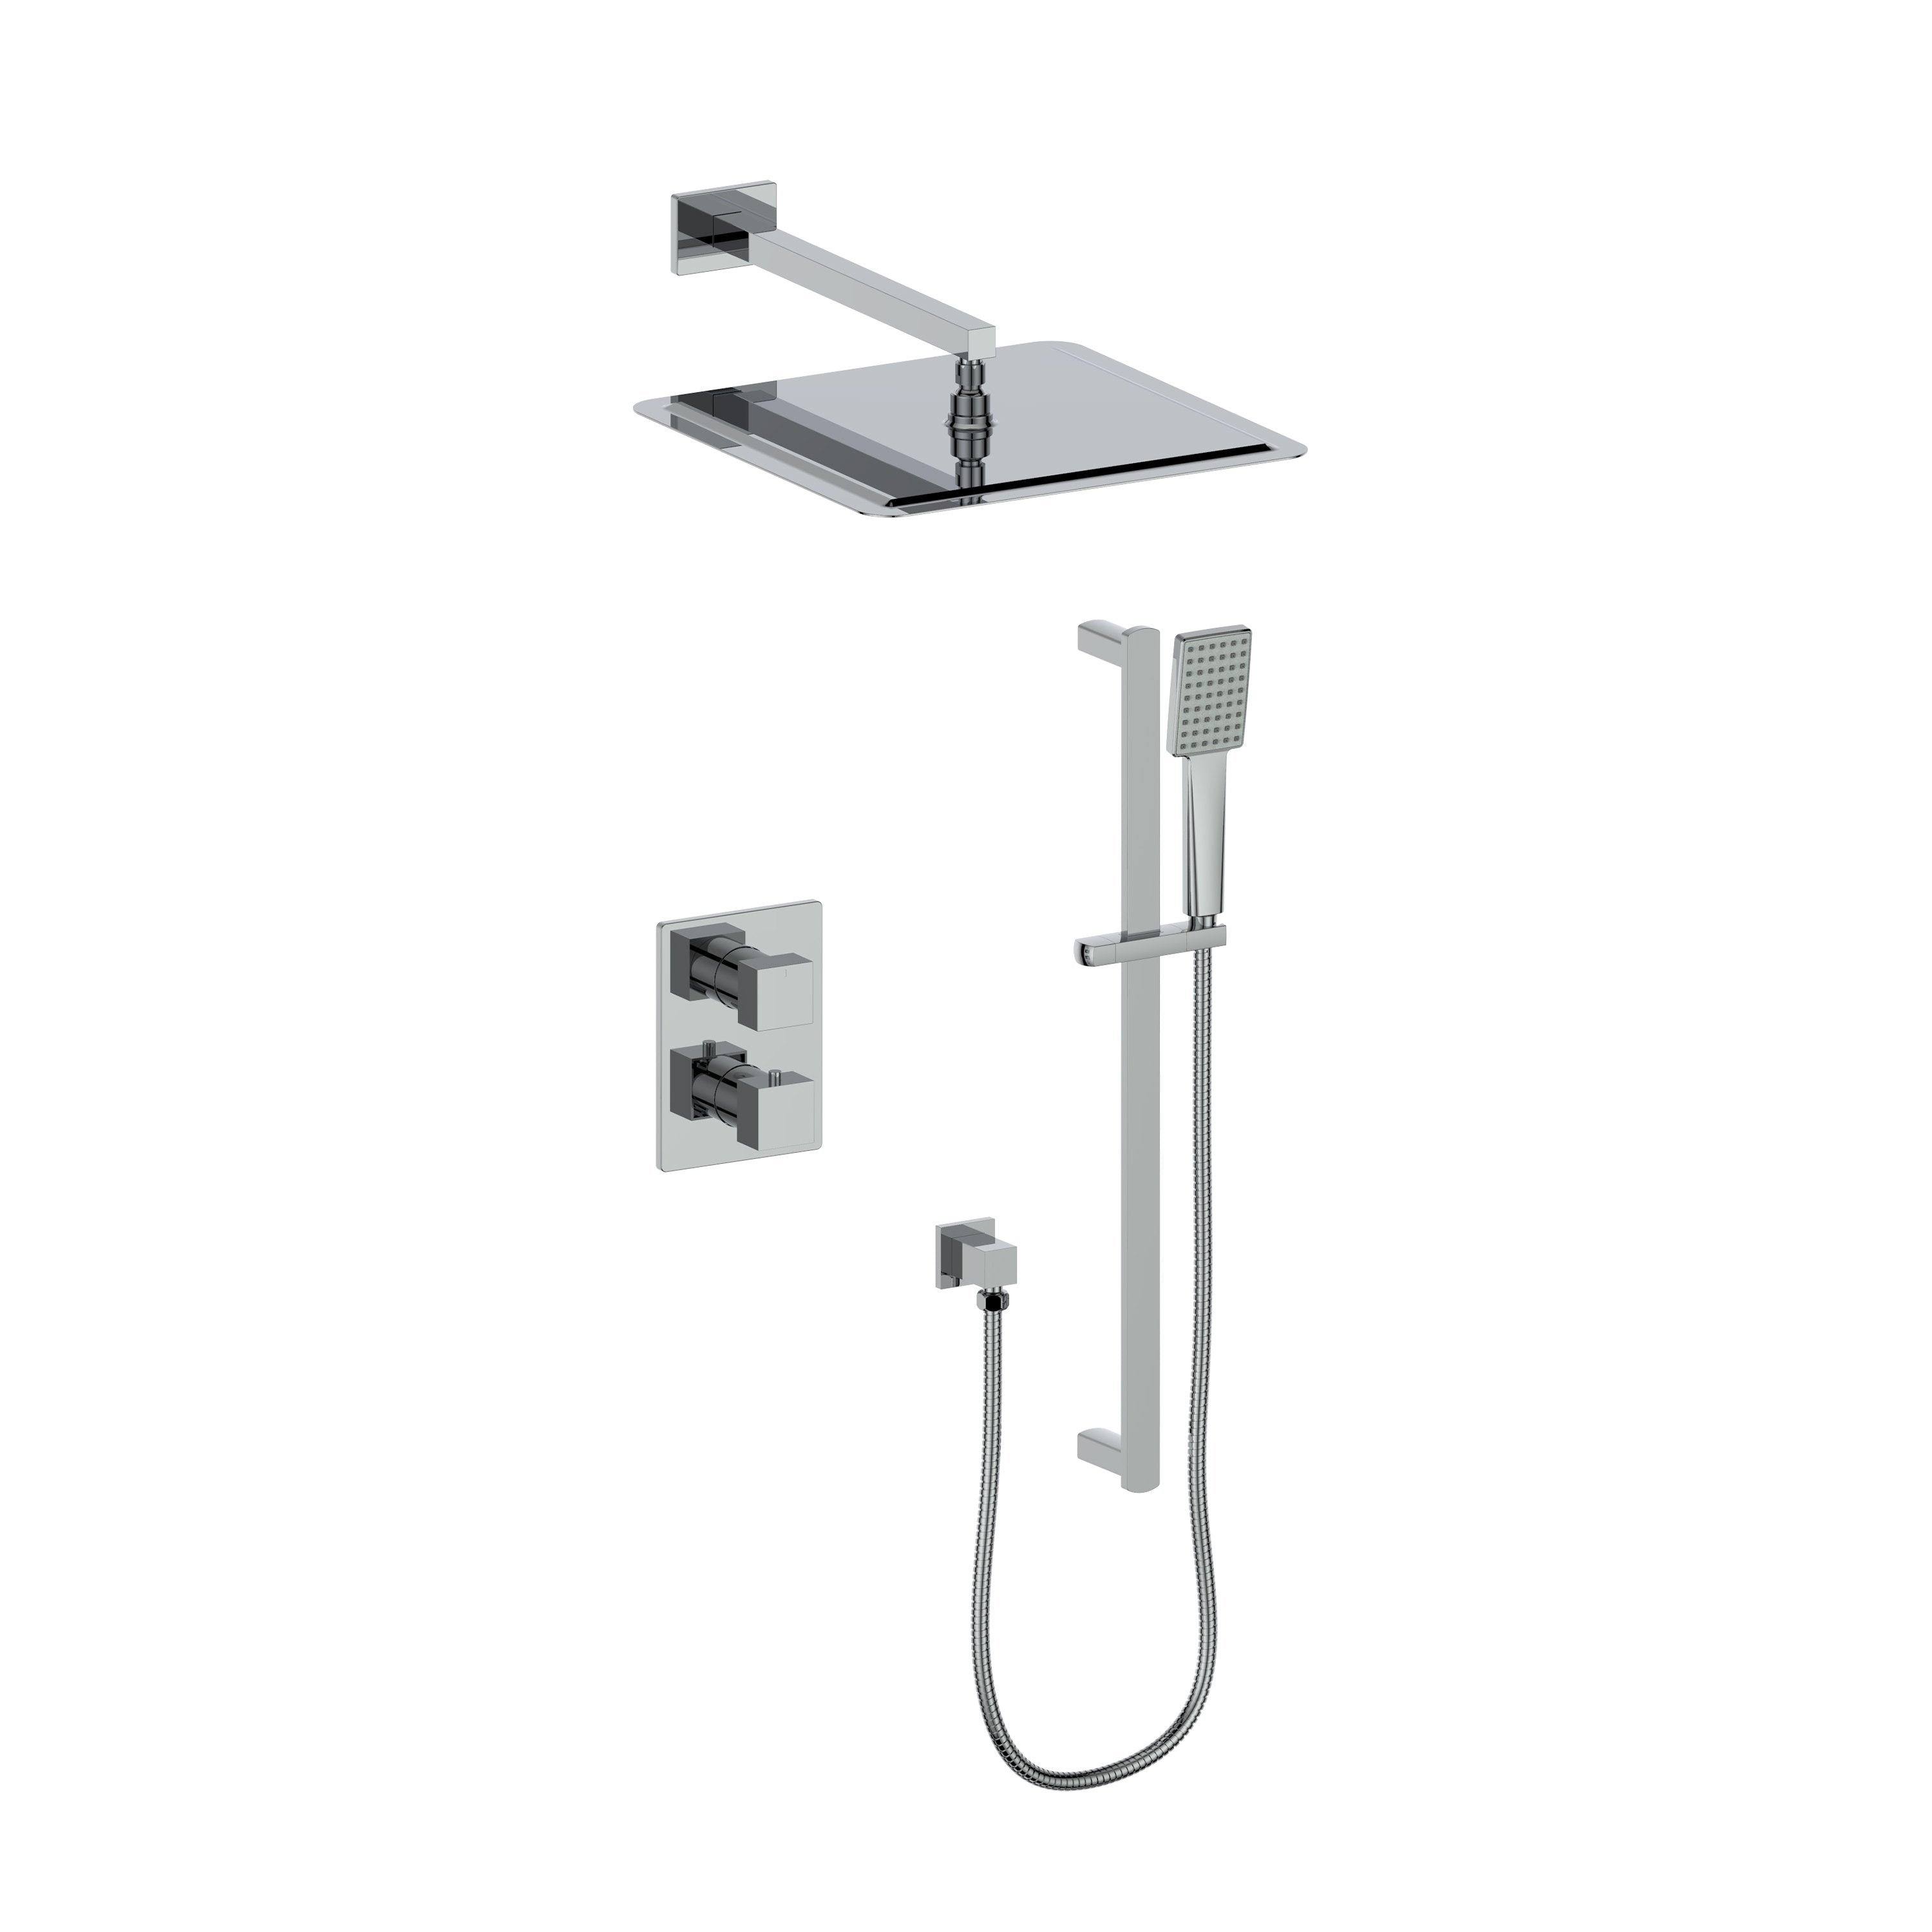 Therangehoodstore.com, ZLINE Crystal Bay Thermostatic Shower System with color options (CBY-SHS-T2), CBY-SHS-T2-CH,